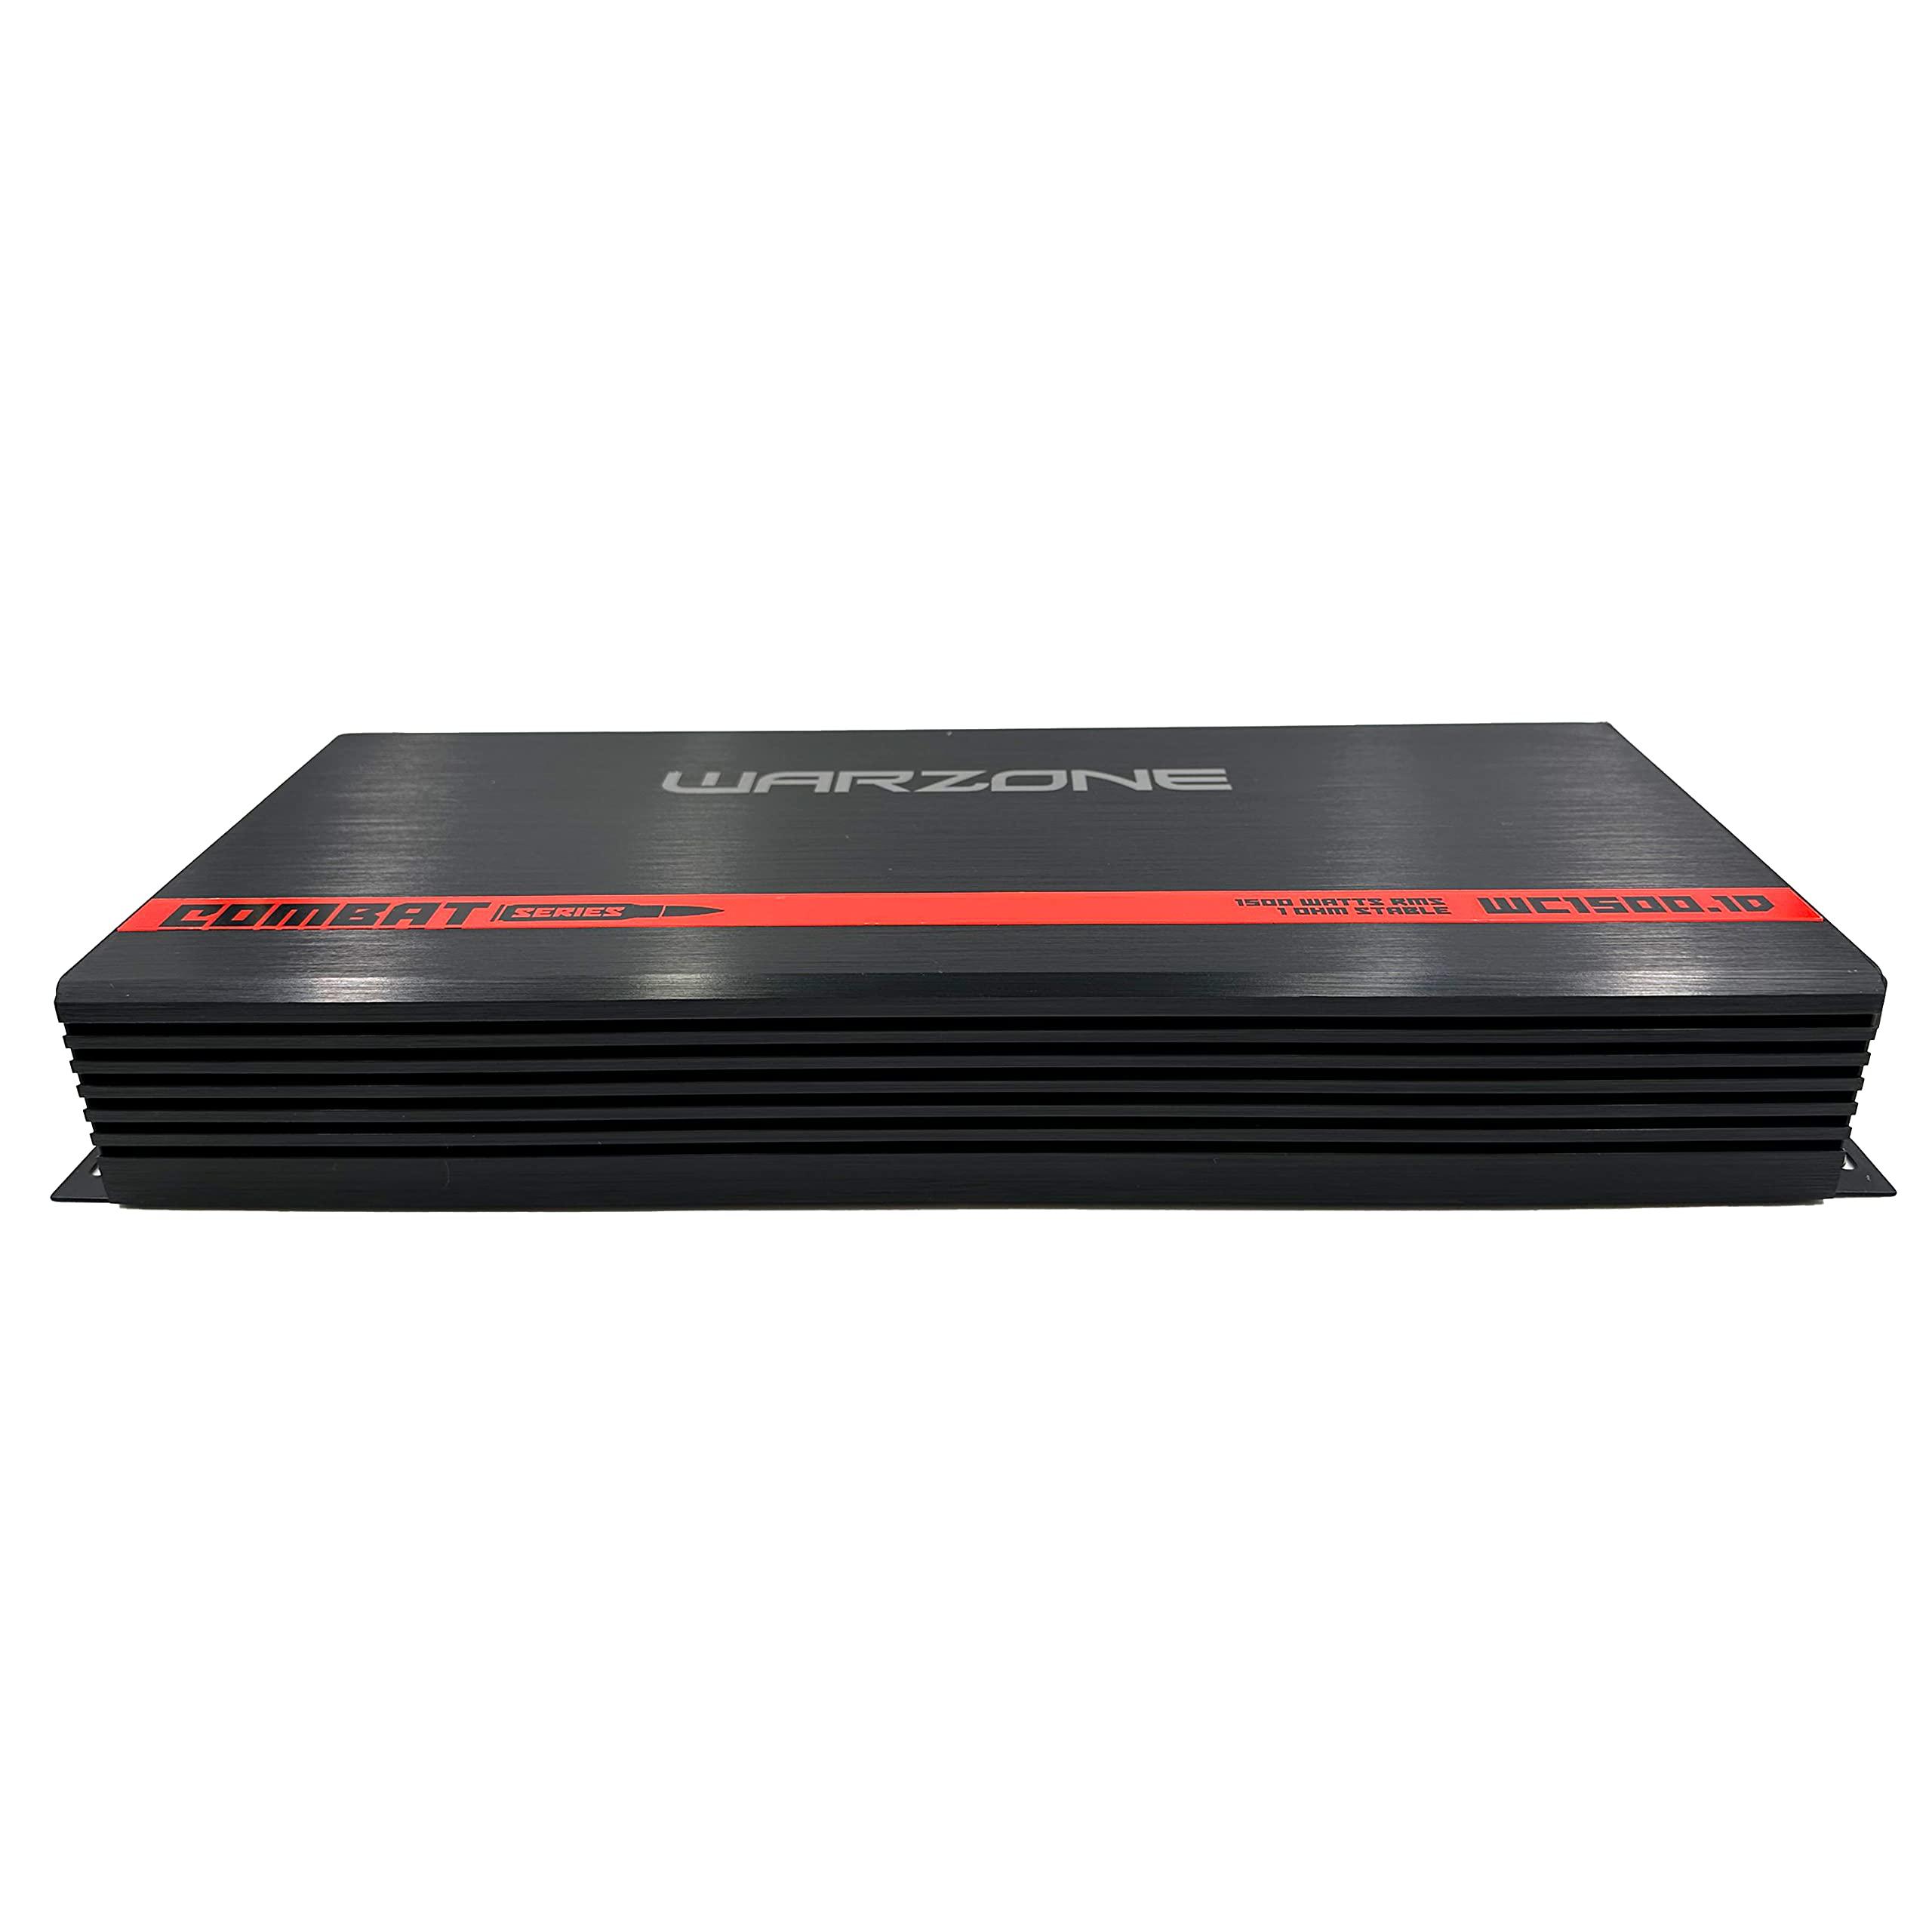 gravity audio wc1500.1d warzone 1500w true rms car amplifier class d amp 1/2/4 ohm stable with remote sub control with 1 year